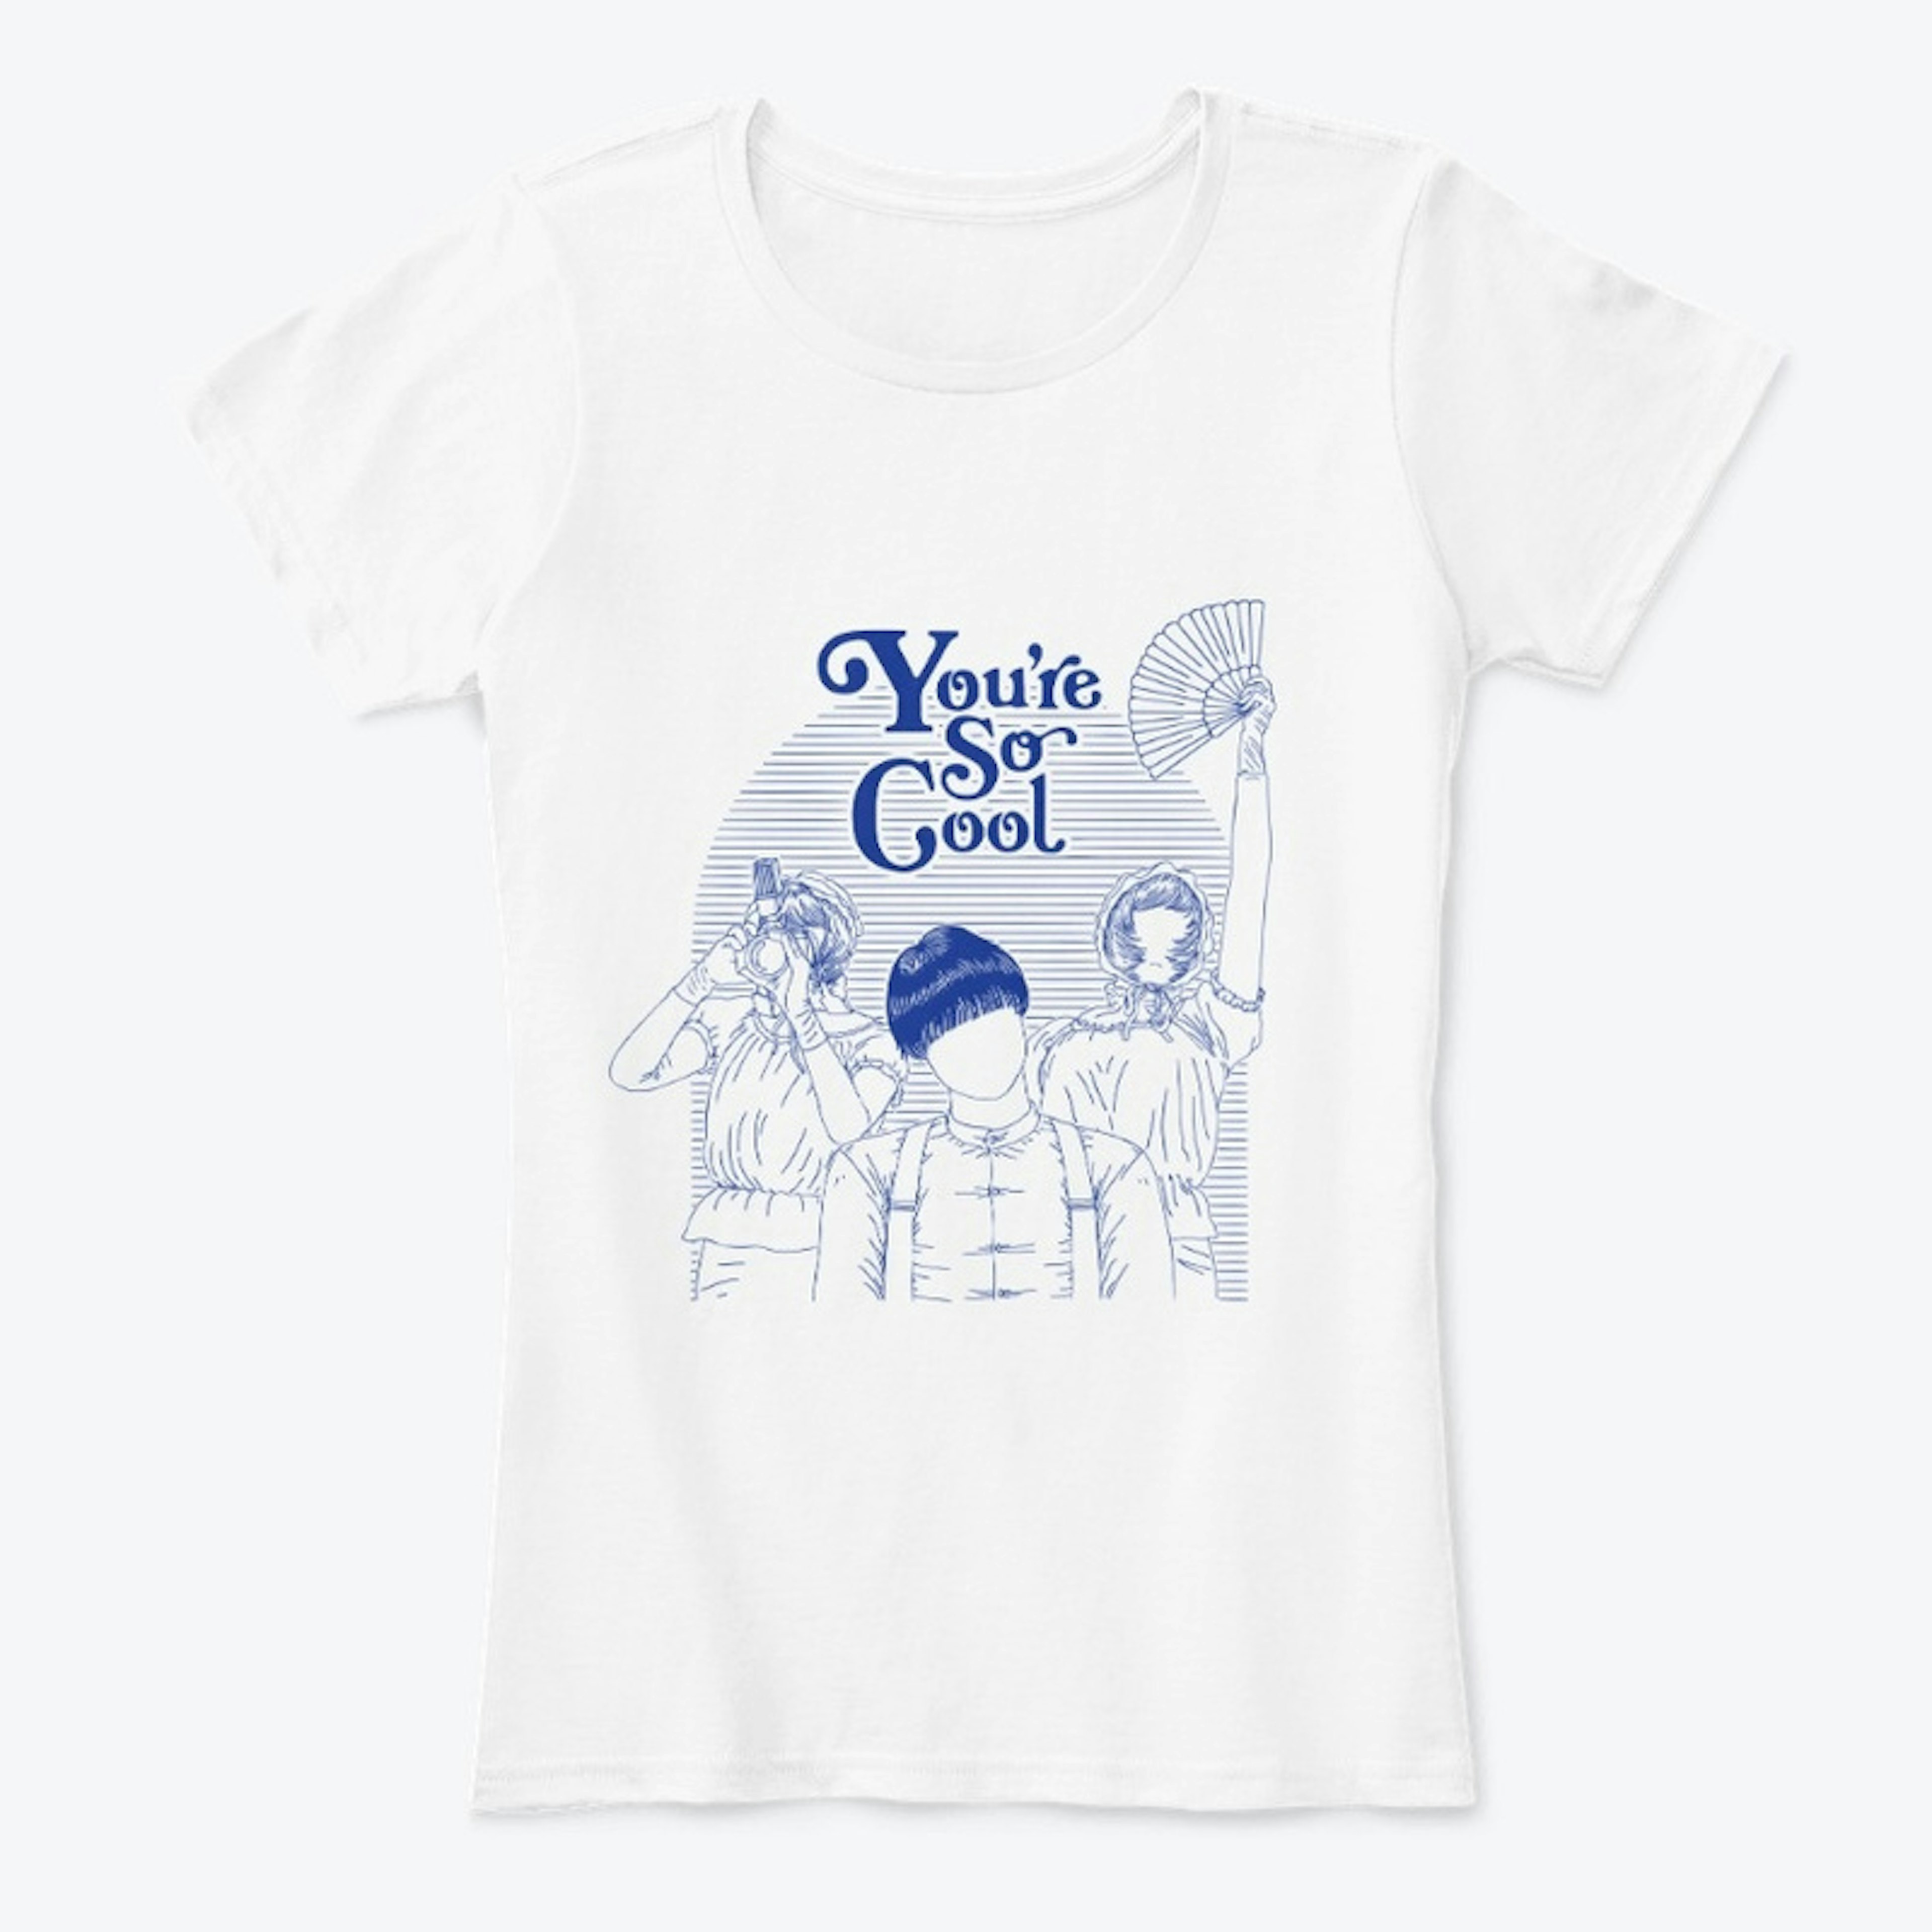 You're So Cool (Women's Slim Fit)